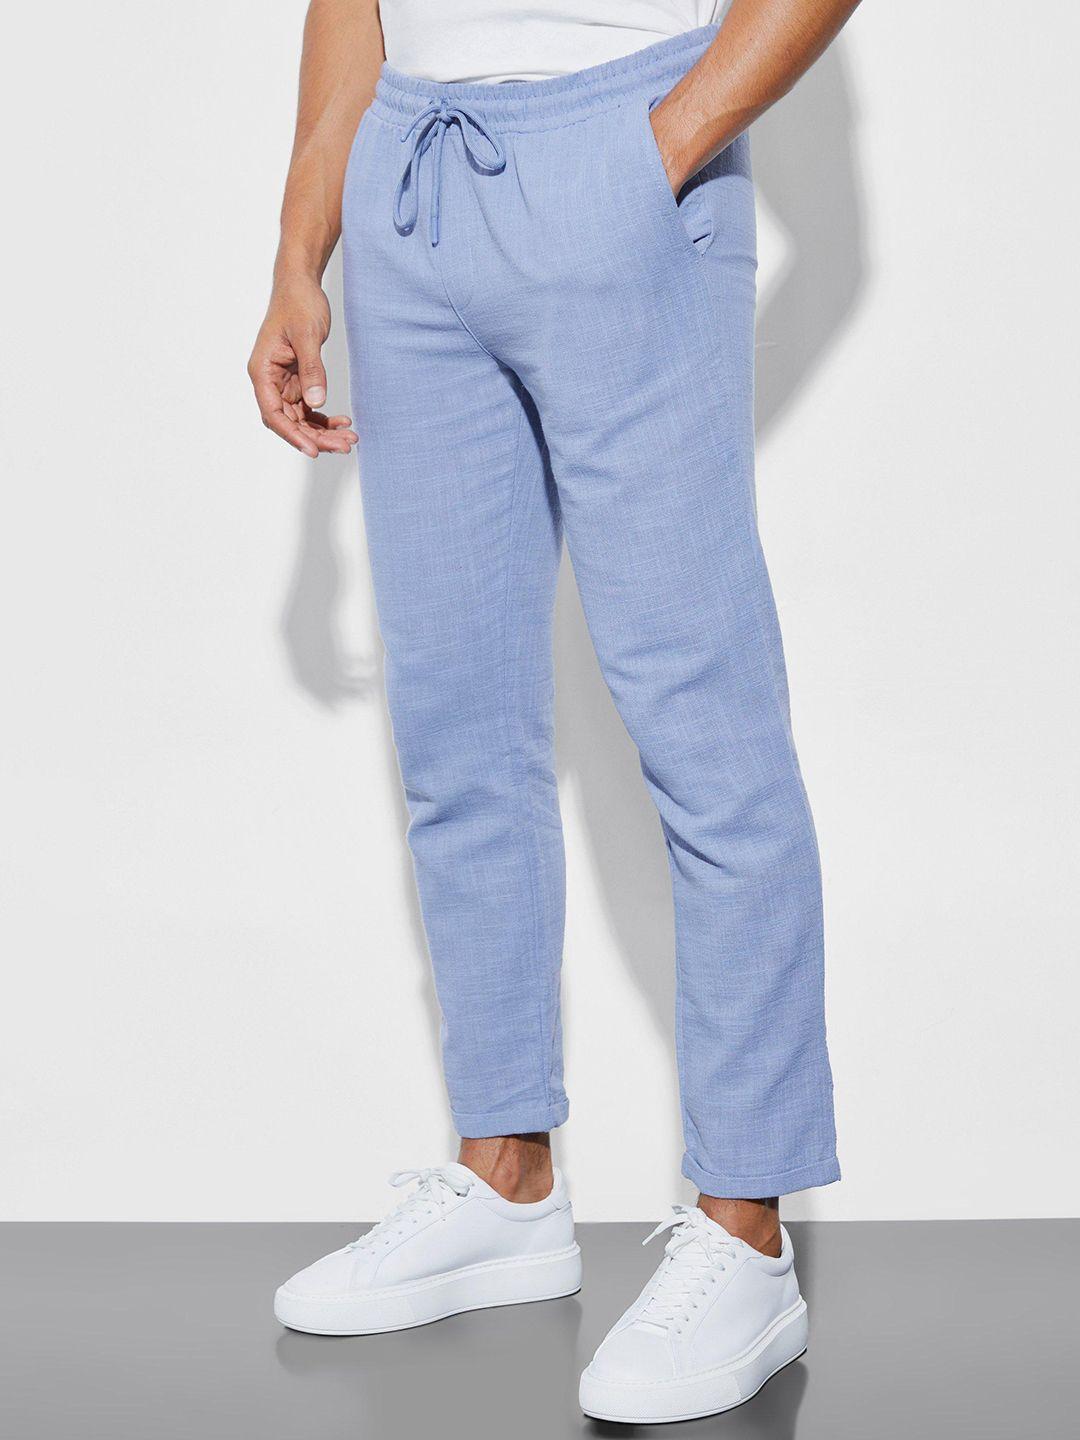 boohooman slim cropped trousers